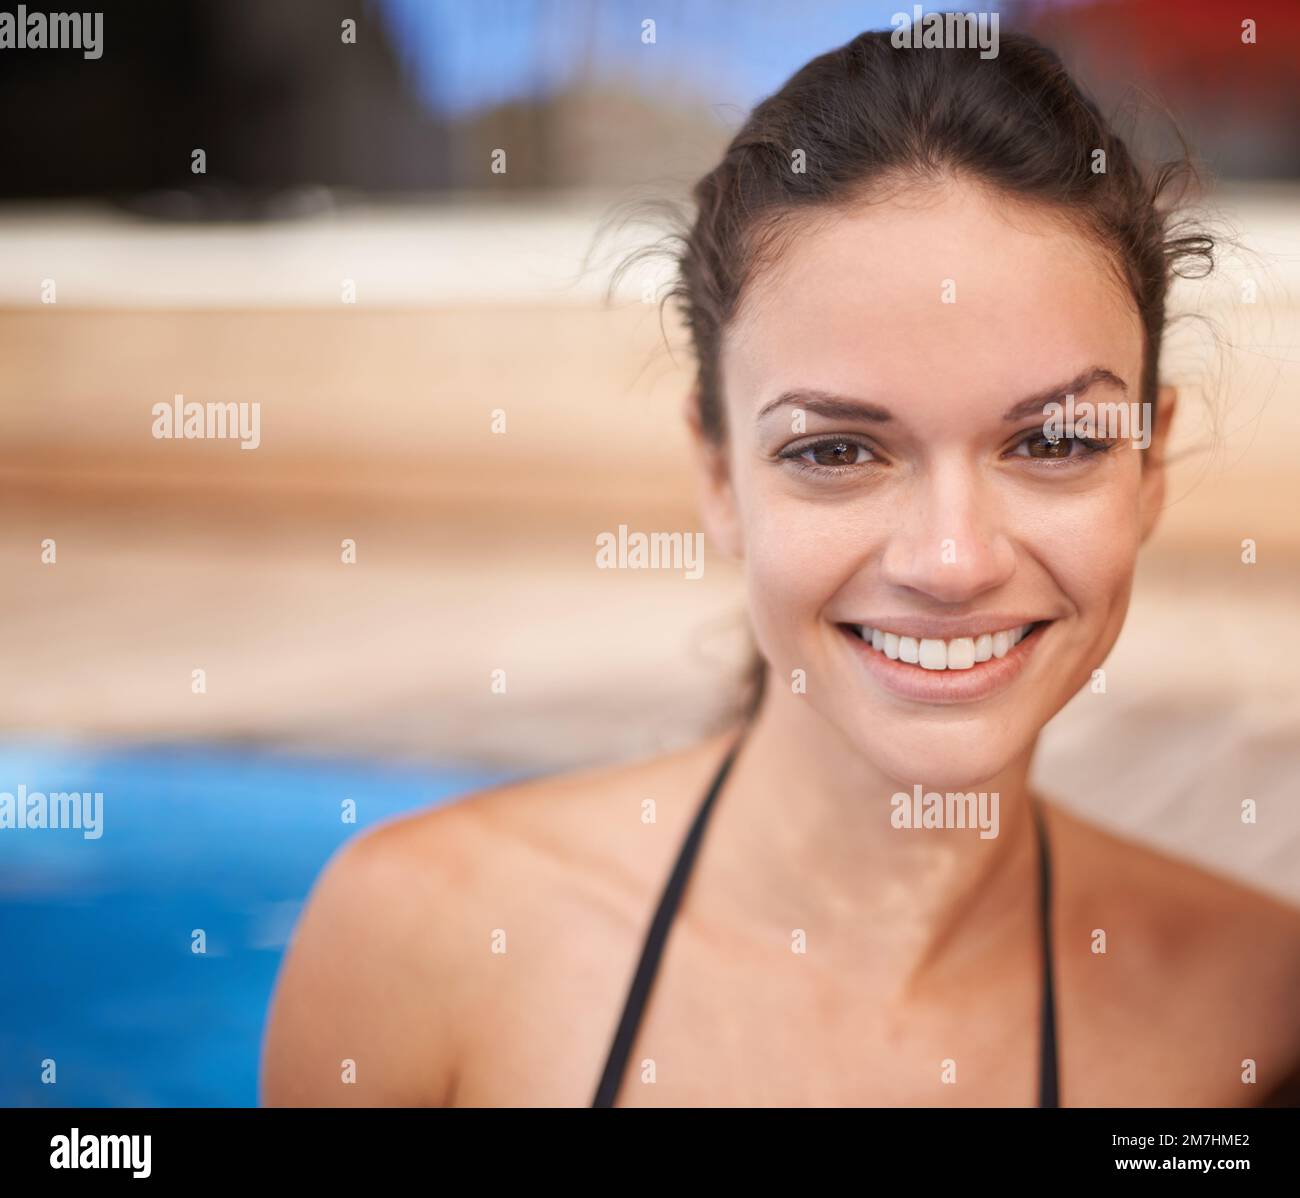 Pretty in the pool. Portrait of an attractive young woman smiling in the pool. Stock Photo